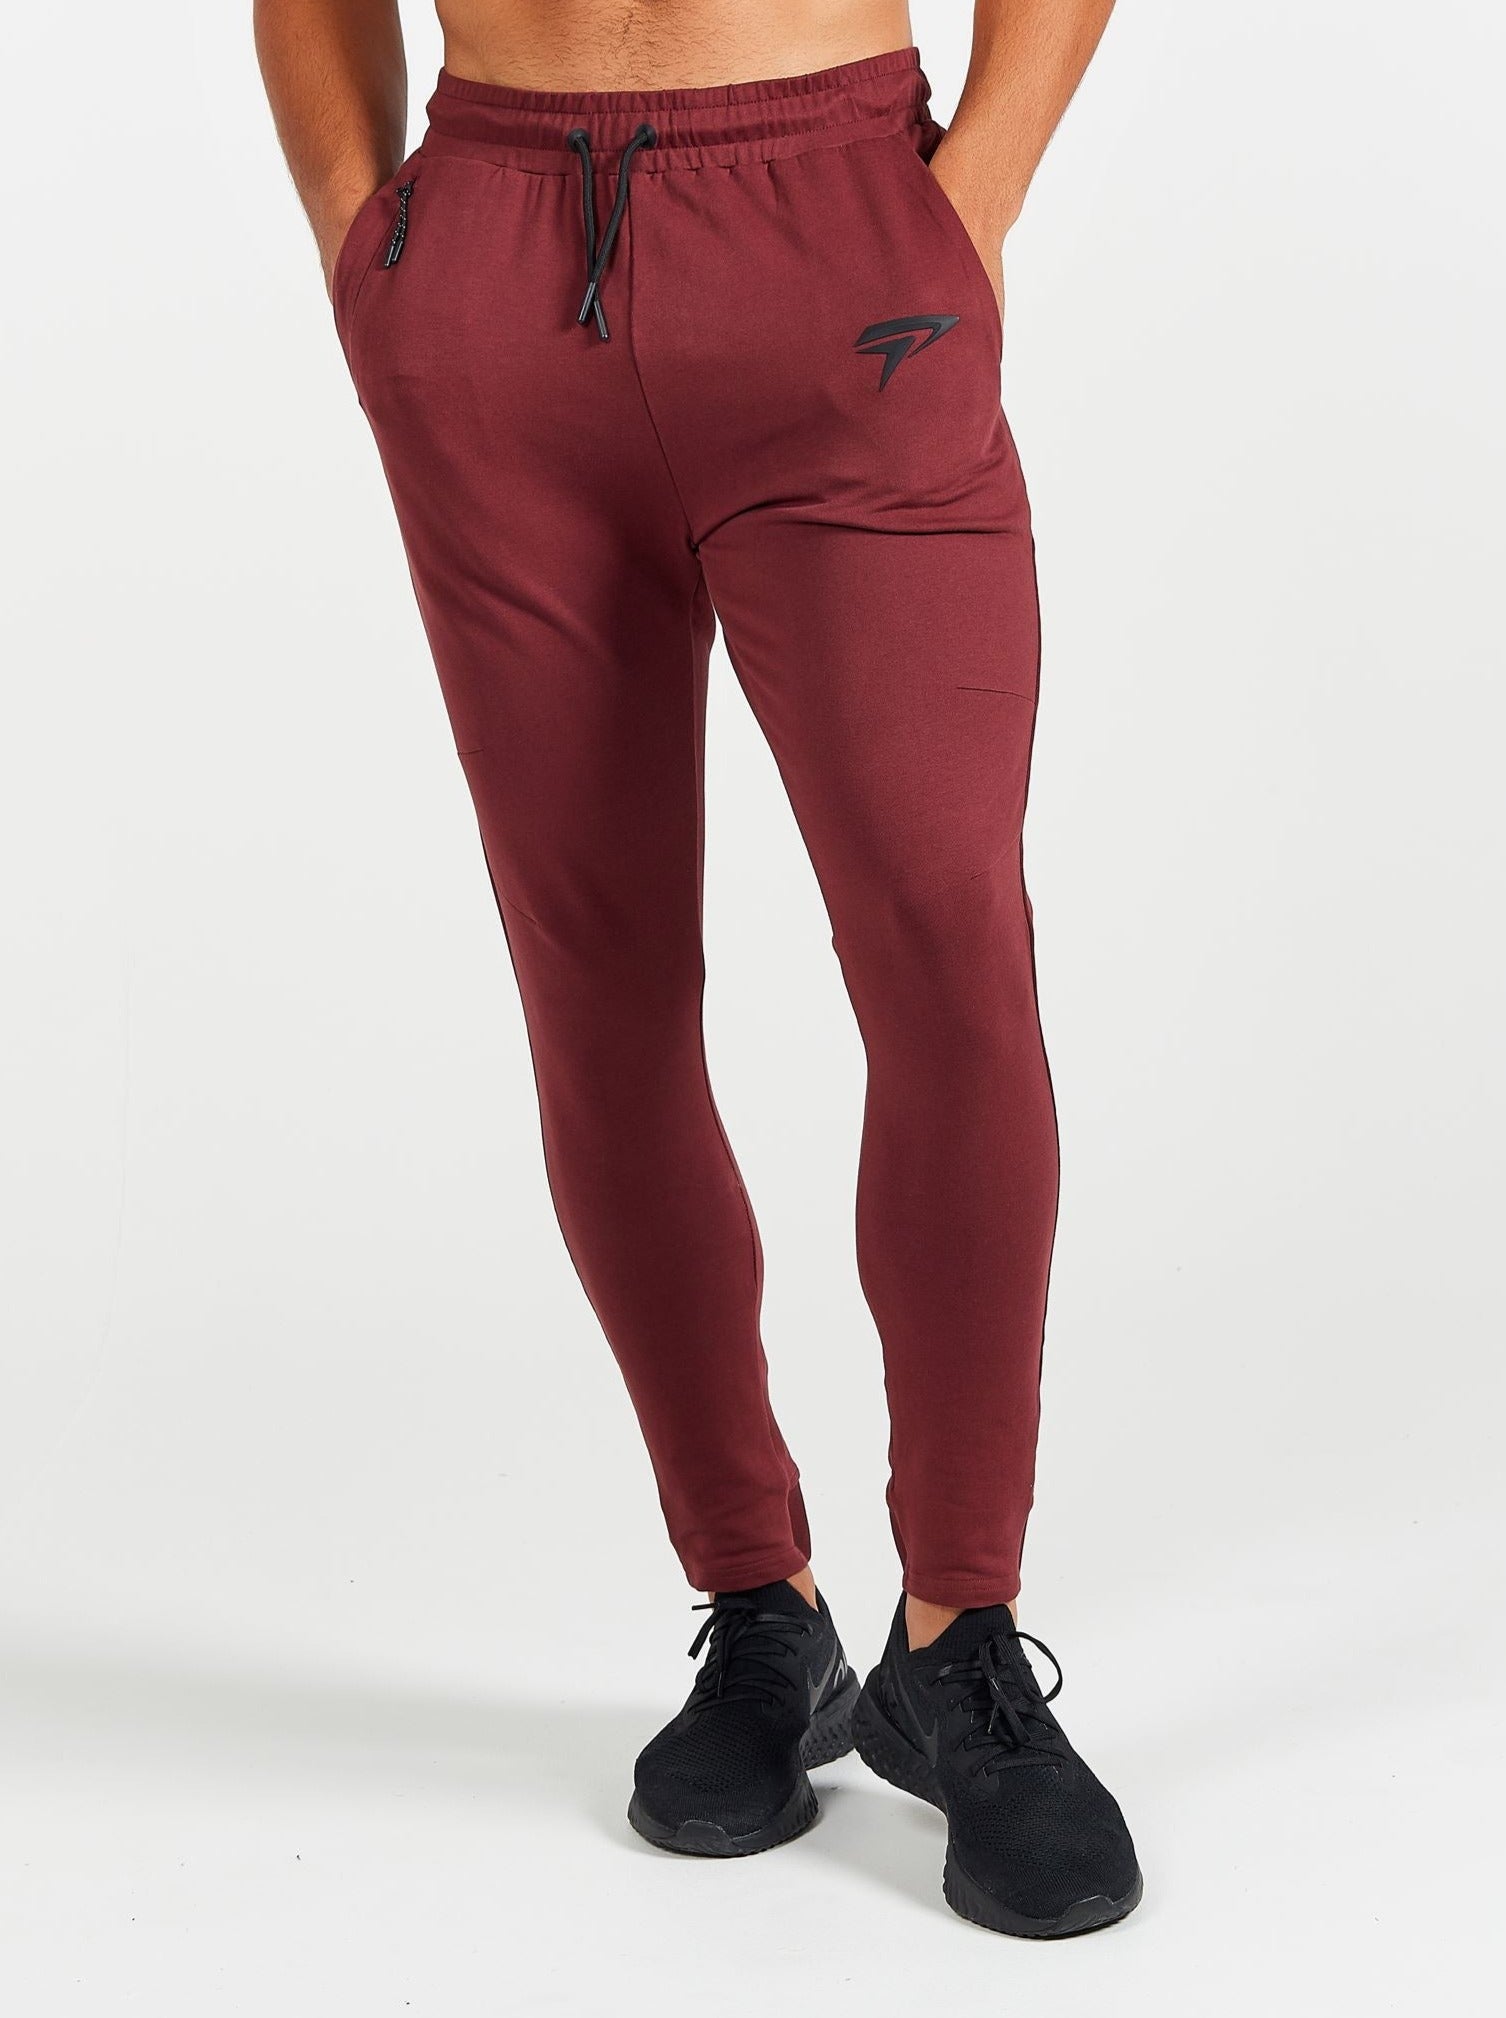 Agile Bottoms - Port Red